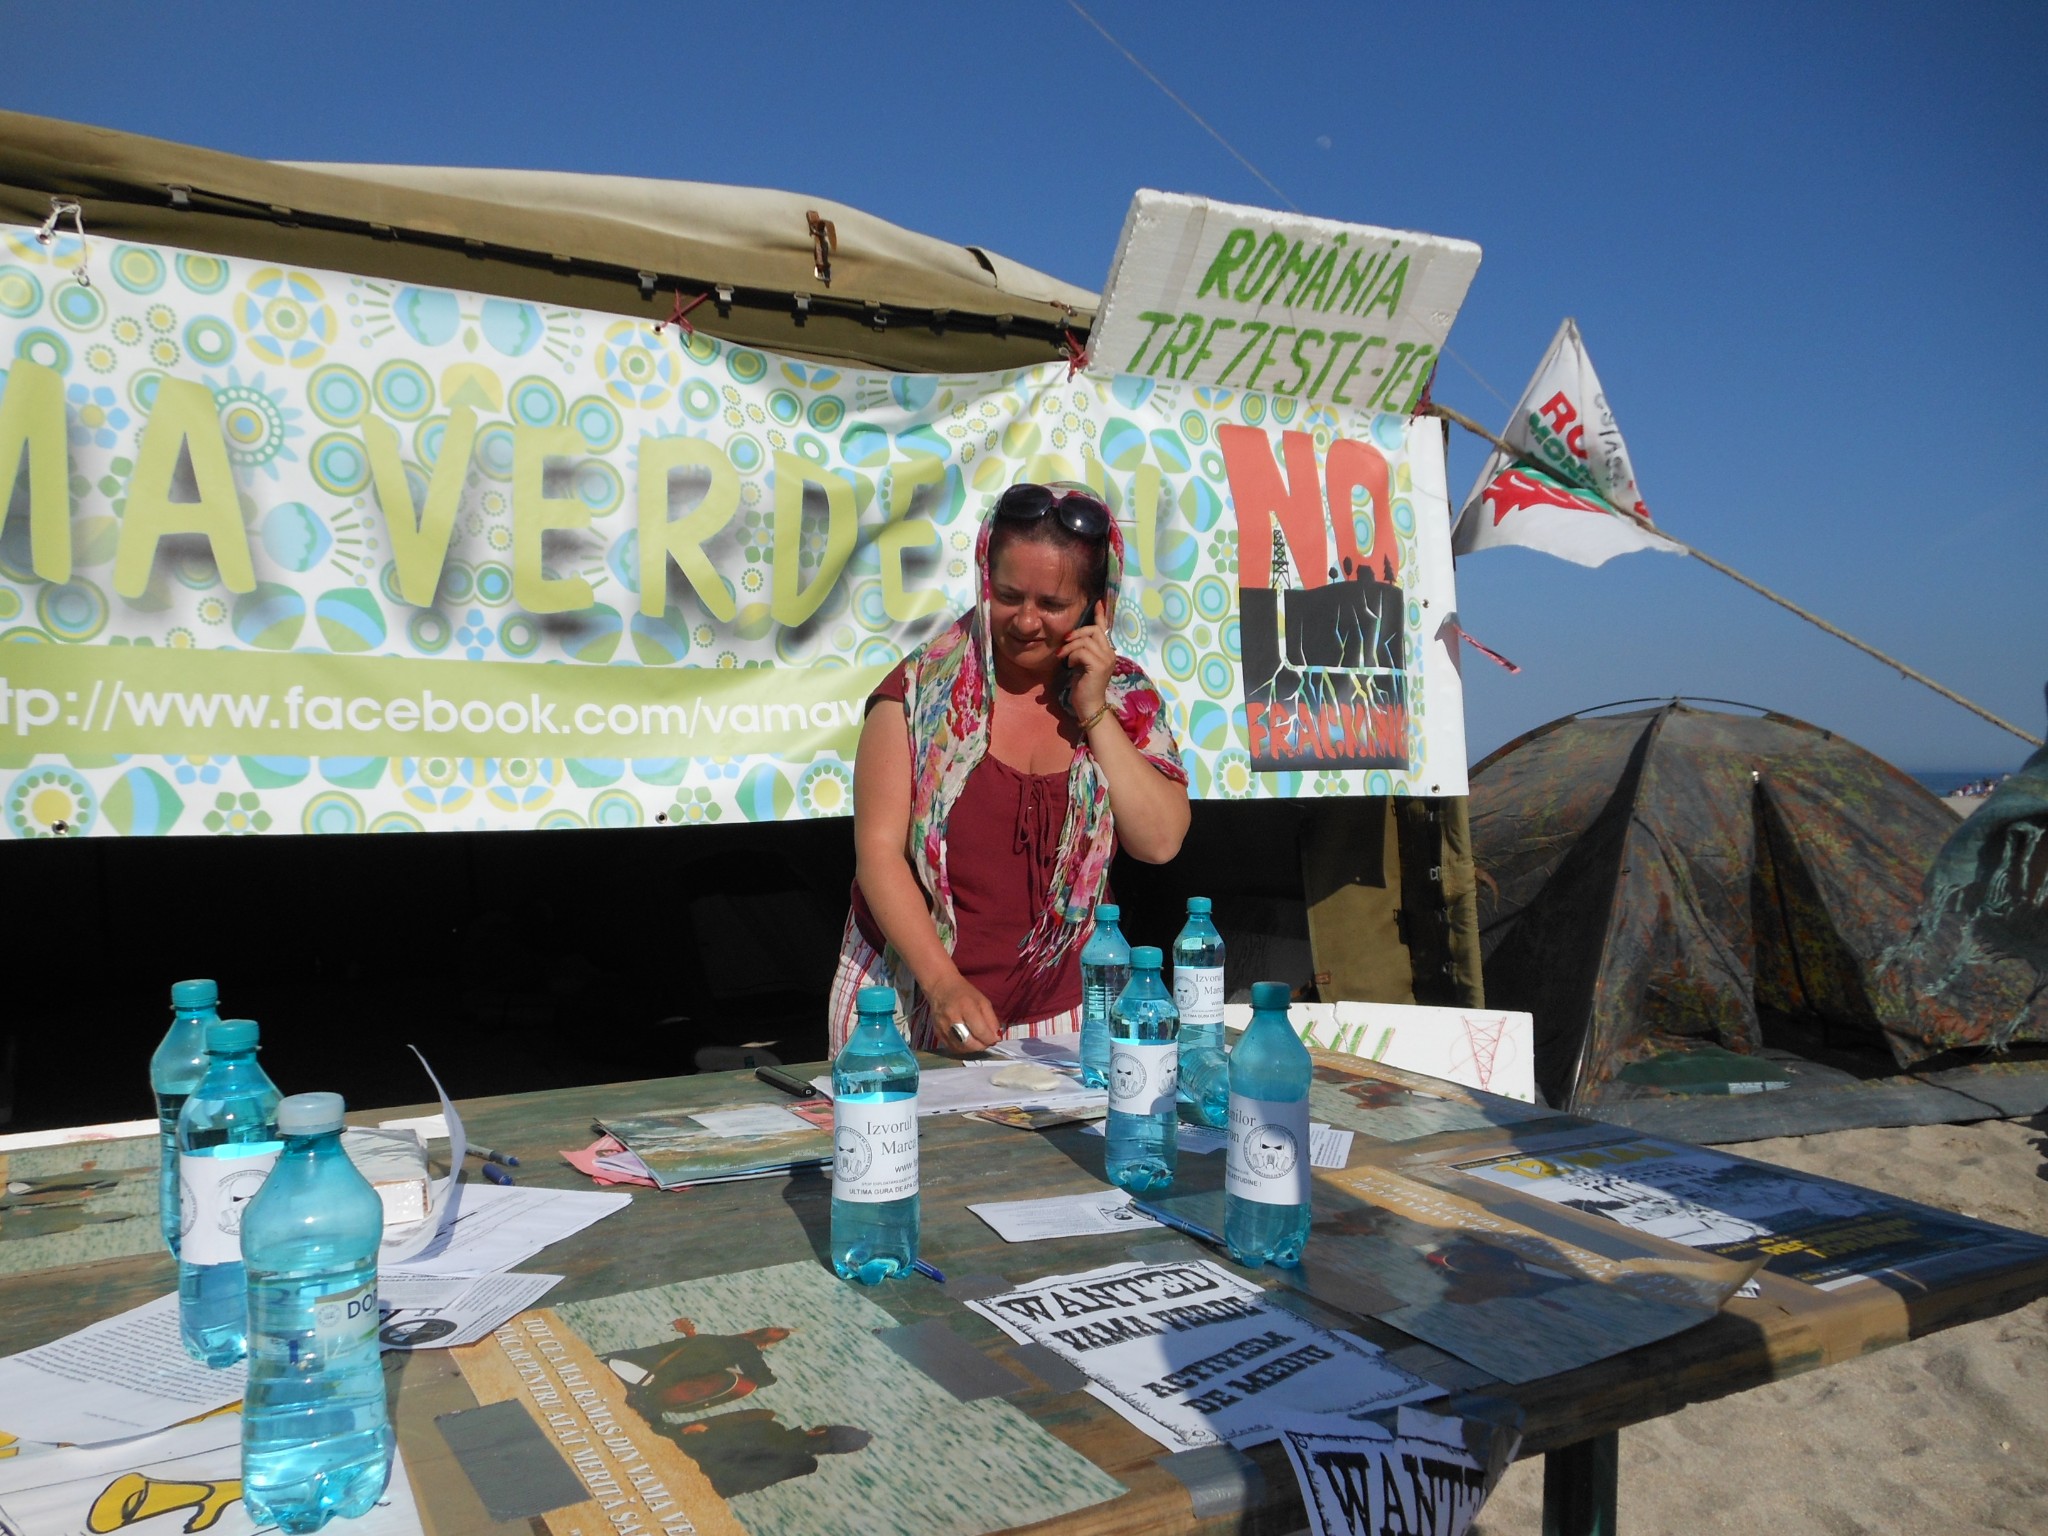 In the seaside village of Vama Veche, Romania, Rodica Cruceanu collects signatures to push for a parliamentary commission to investigate the environmental impact of fracking. (Image: Dimiter Kenarov)